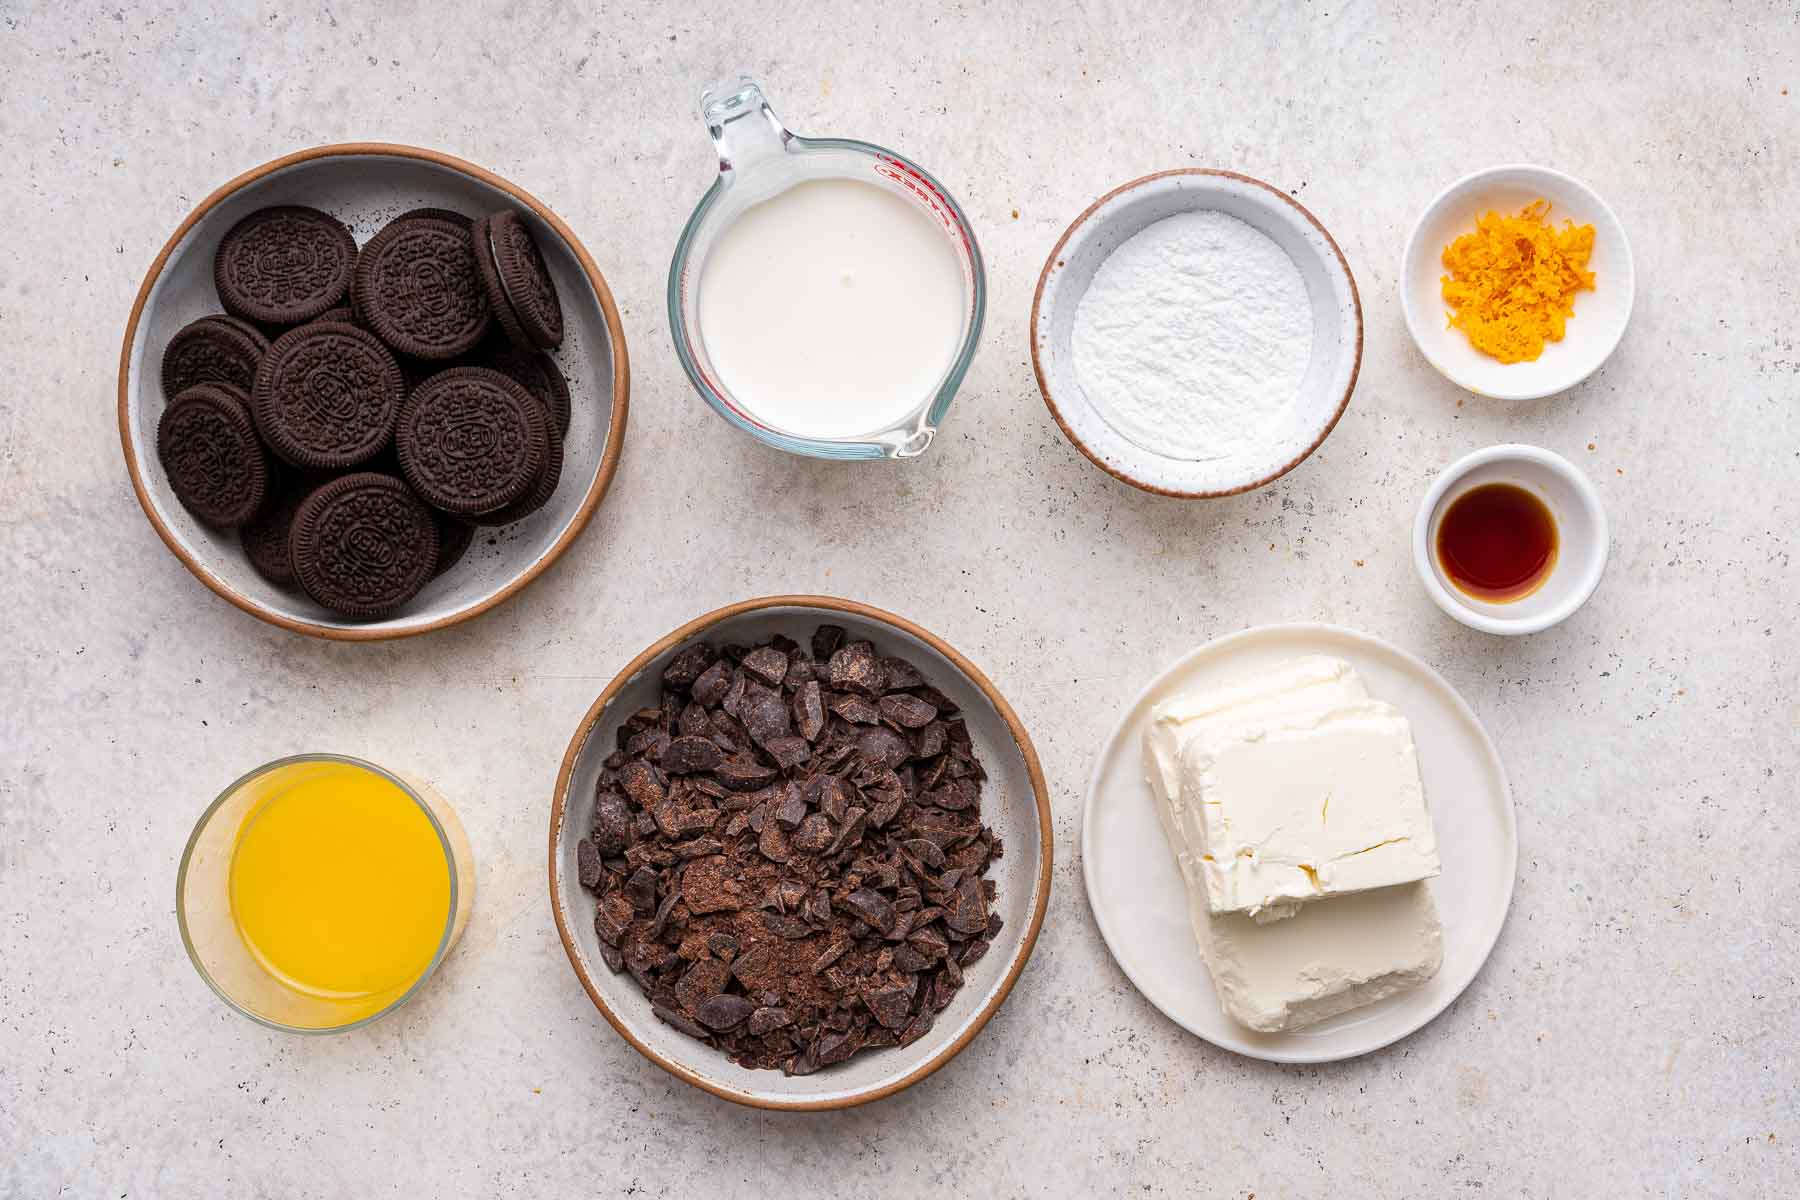 Small bowls of chocolate, cream cheese and orange juice on marble counter.